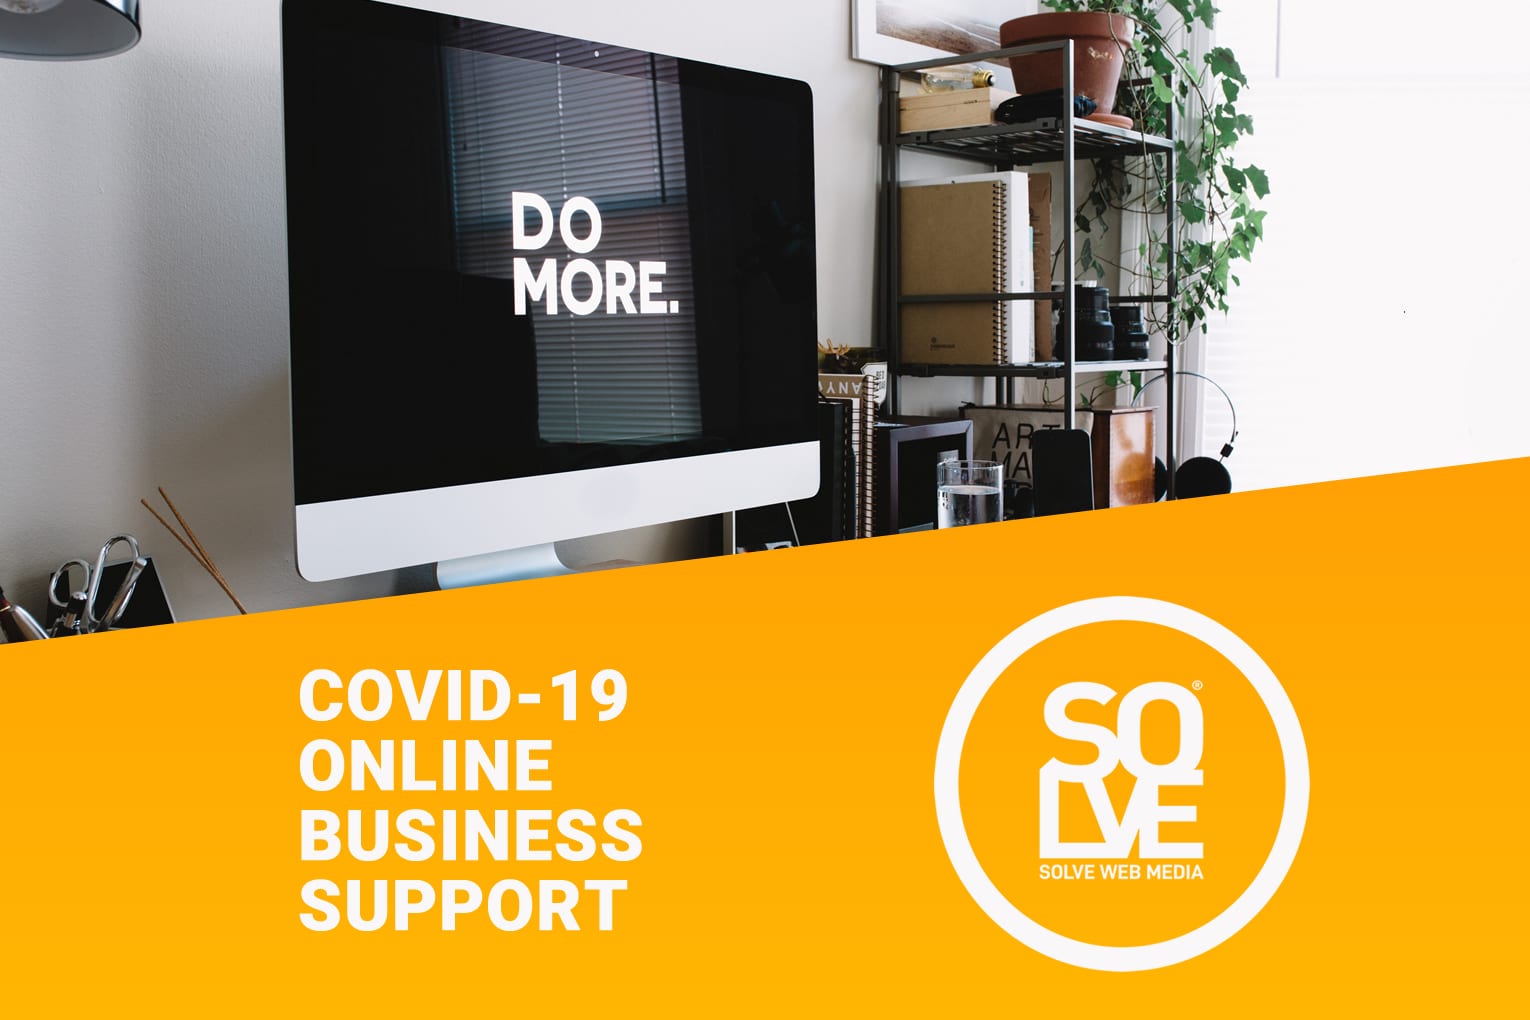 Press Release: Online Business Support During COVID-19 1